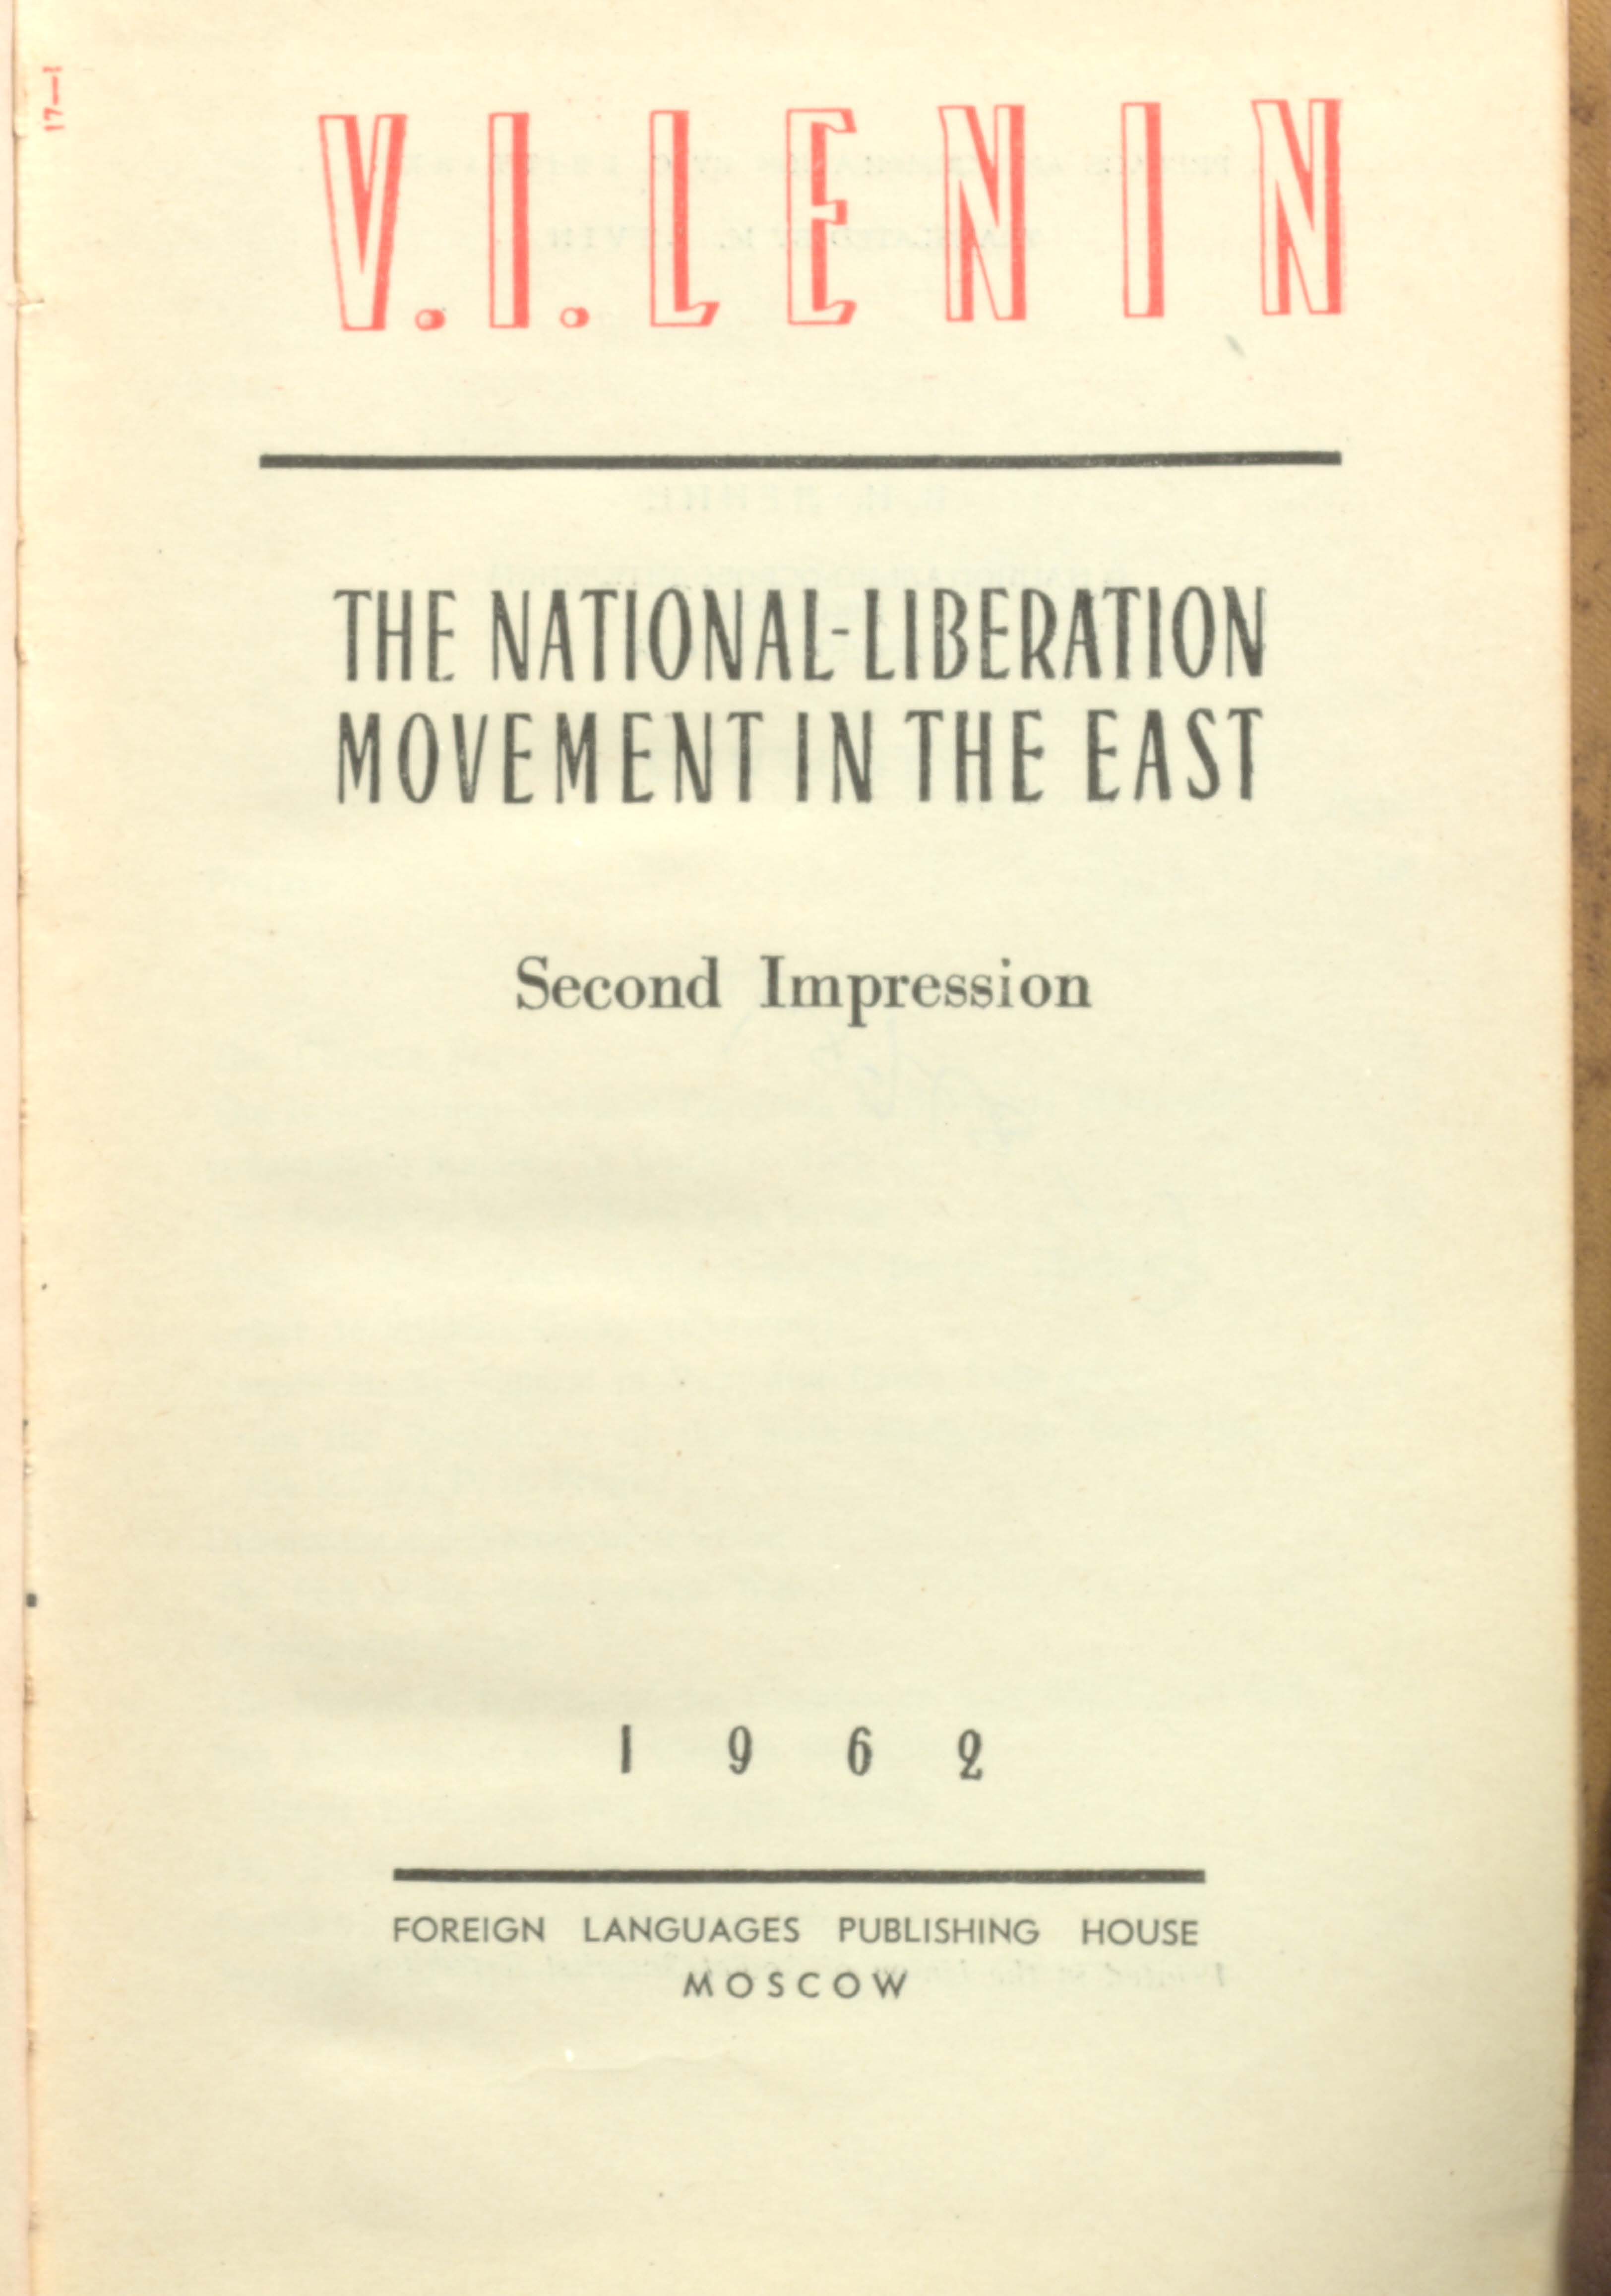 Lenin The National- Liberation Movement In The East Second Impression (1962)